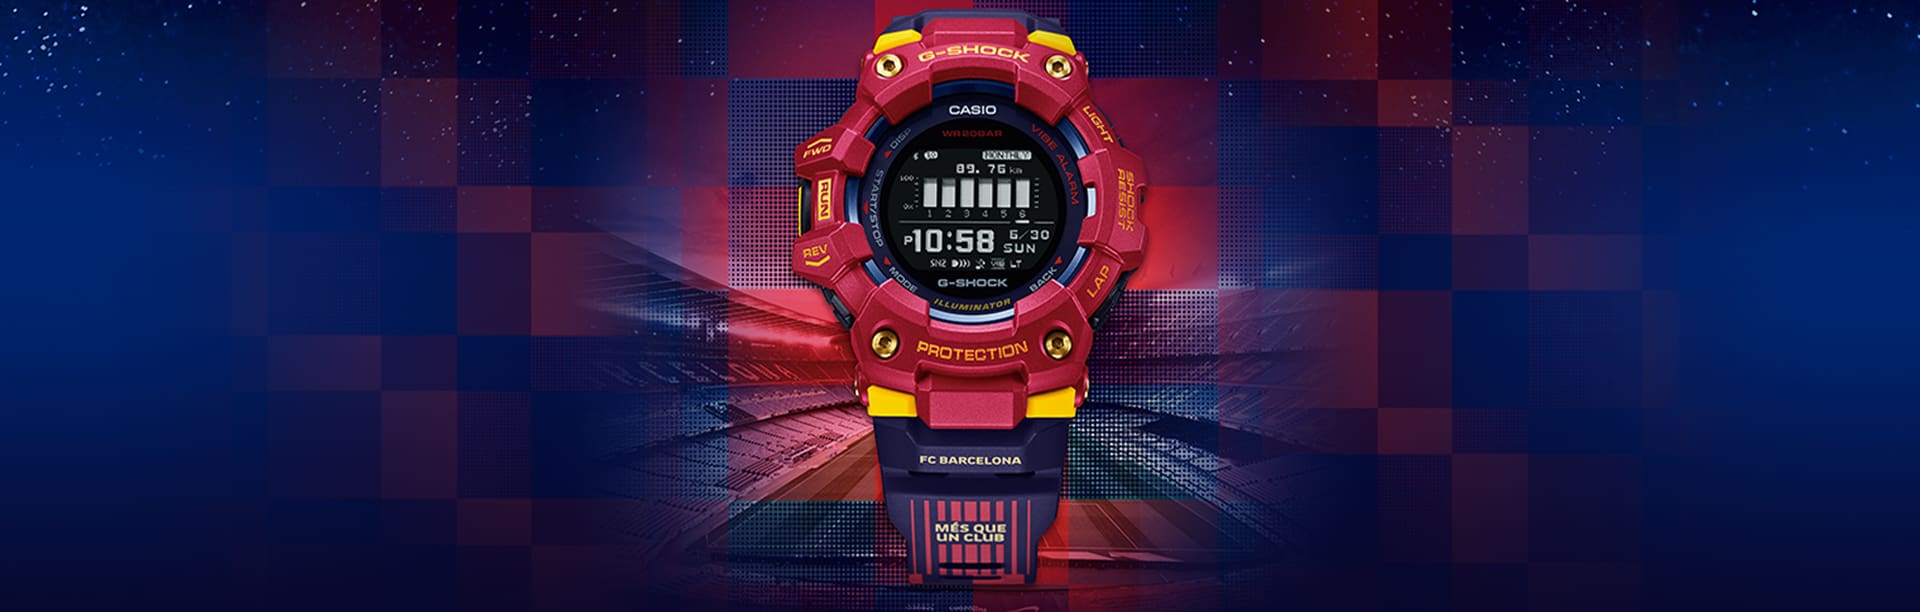 G-SHOCK GBDH1000 red and yellow Barcelona Matchday watch